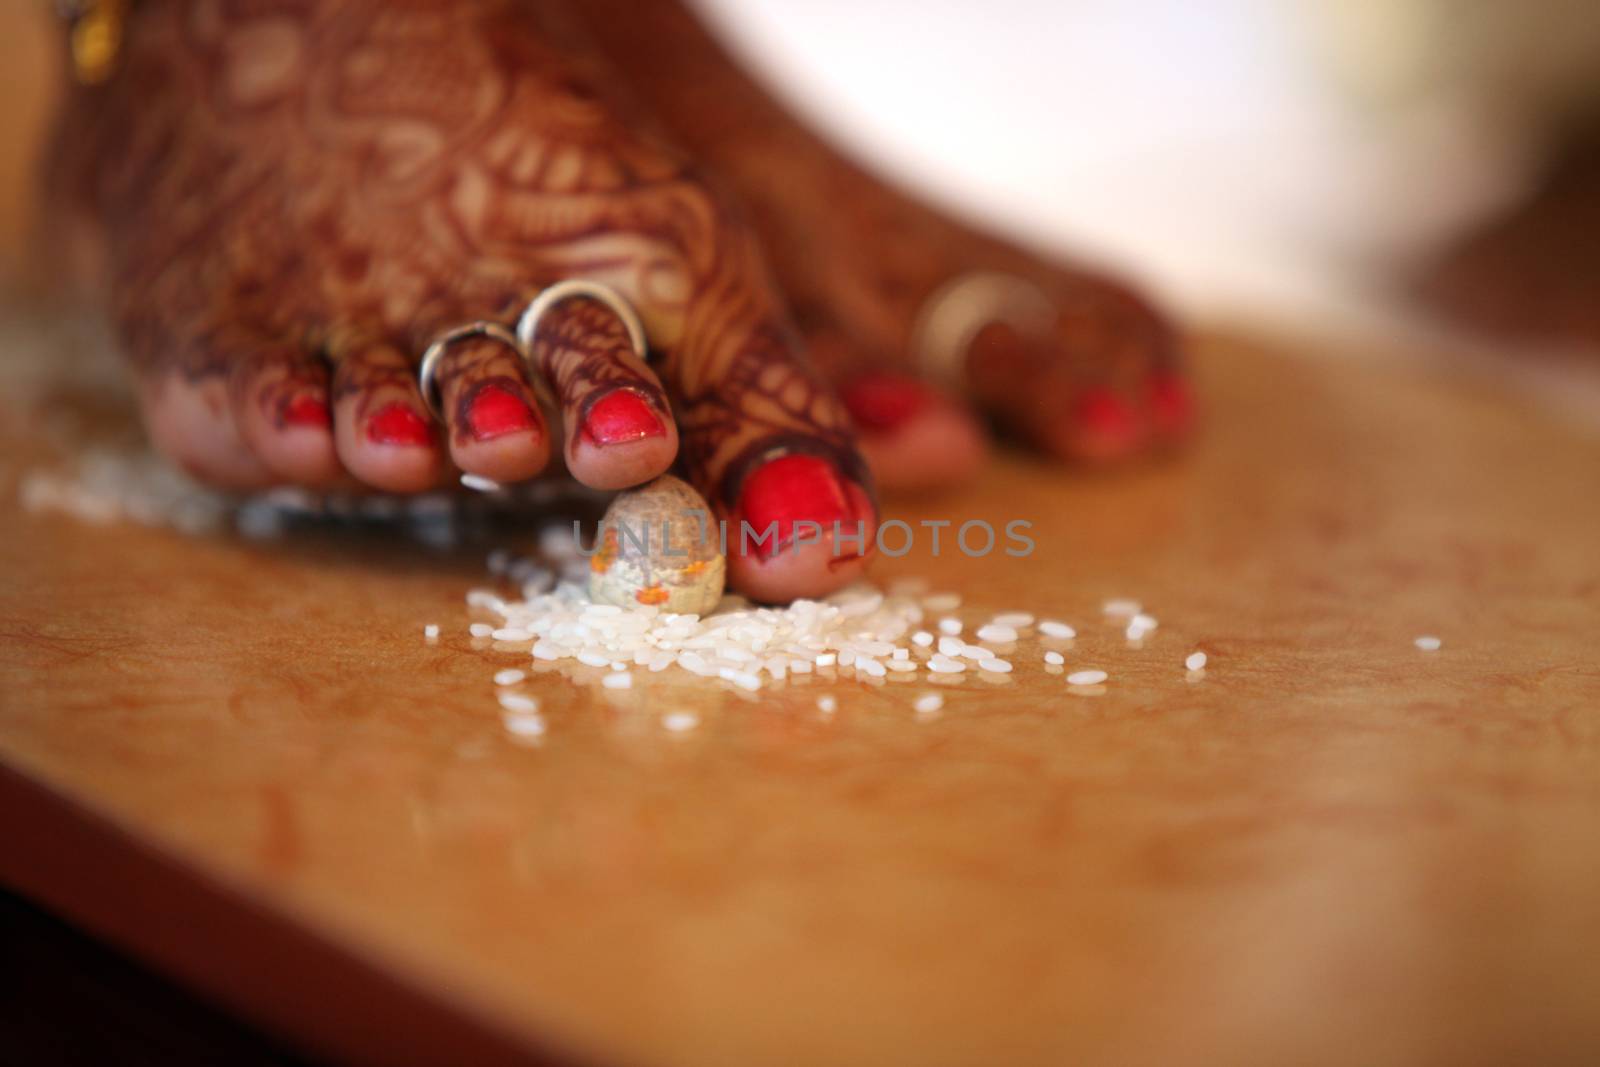 The last steps of the bride among the 7 taken during a traditional hindu religious wedding consisting of a betelnut and rice.